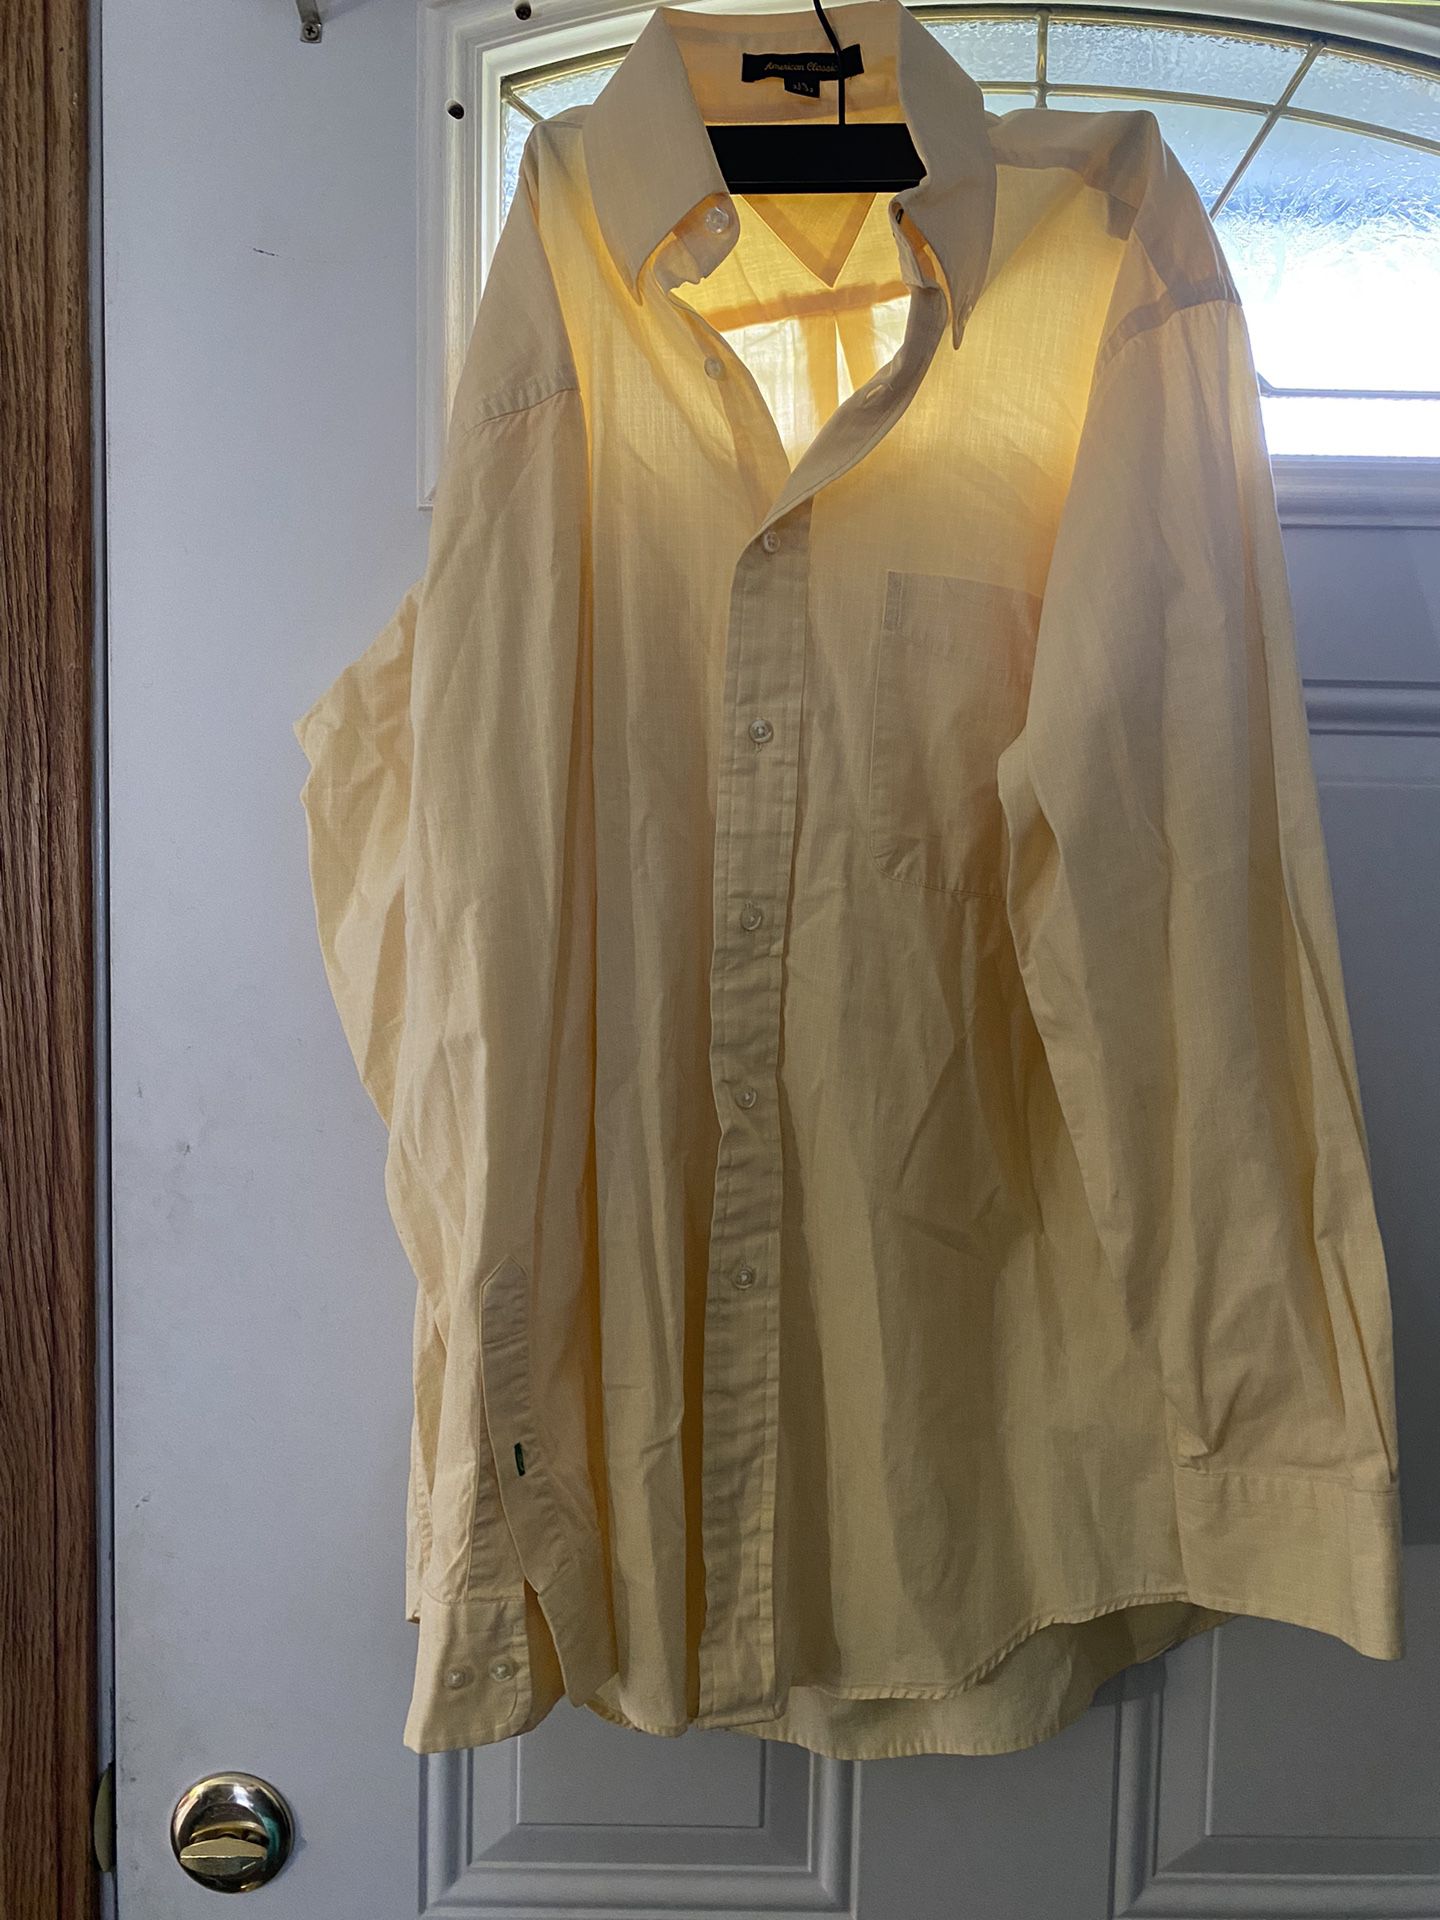 Yellow Tommy Hilfiger Size 15 32/33 Button Down Shirt